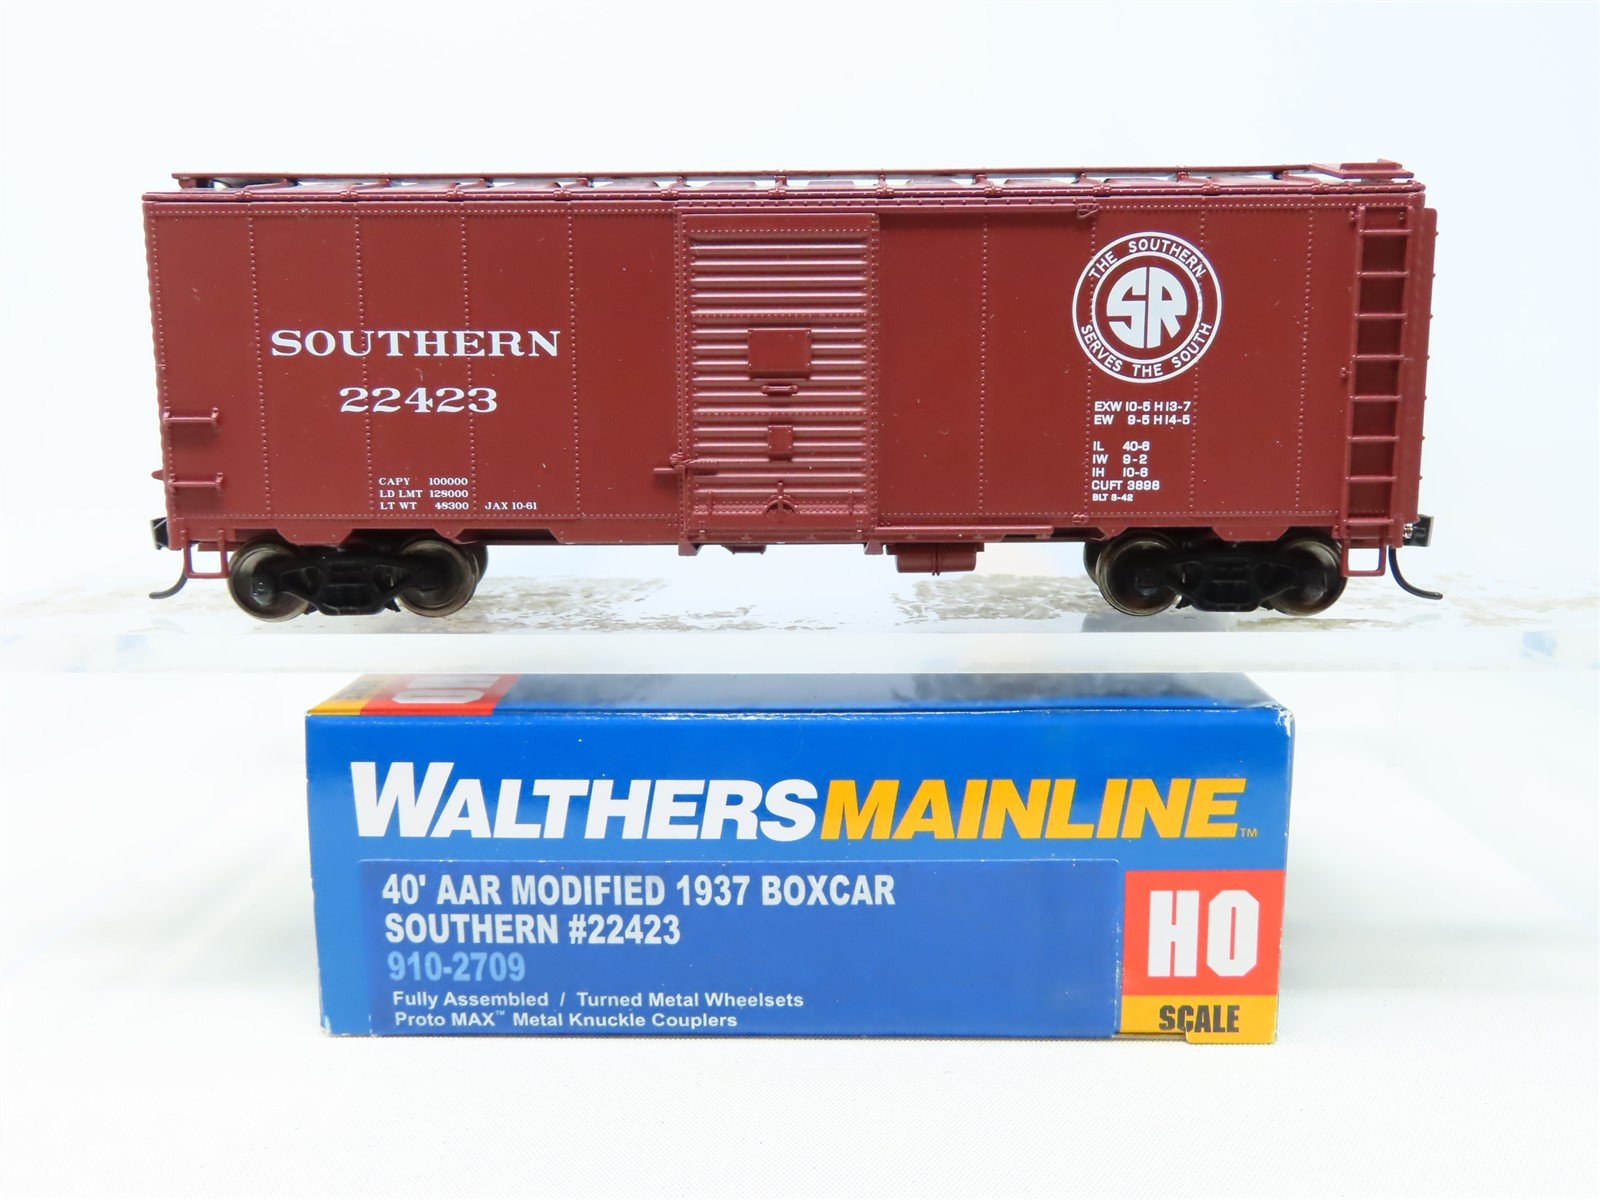 HO Scale Walthers Mainline 910-2709 Southern Railway 40' Boxcar #22423